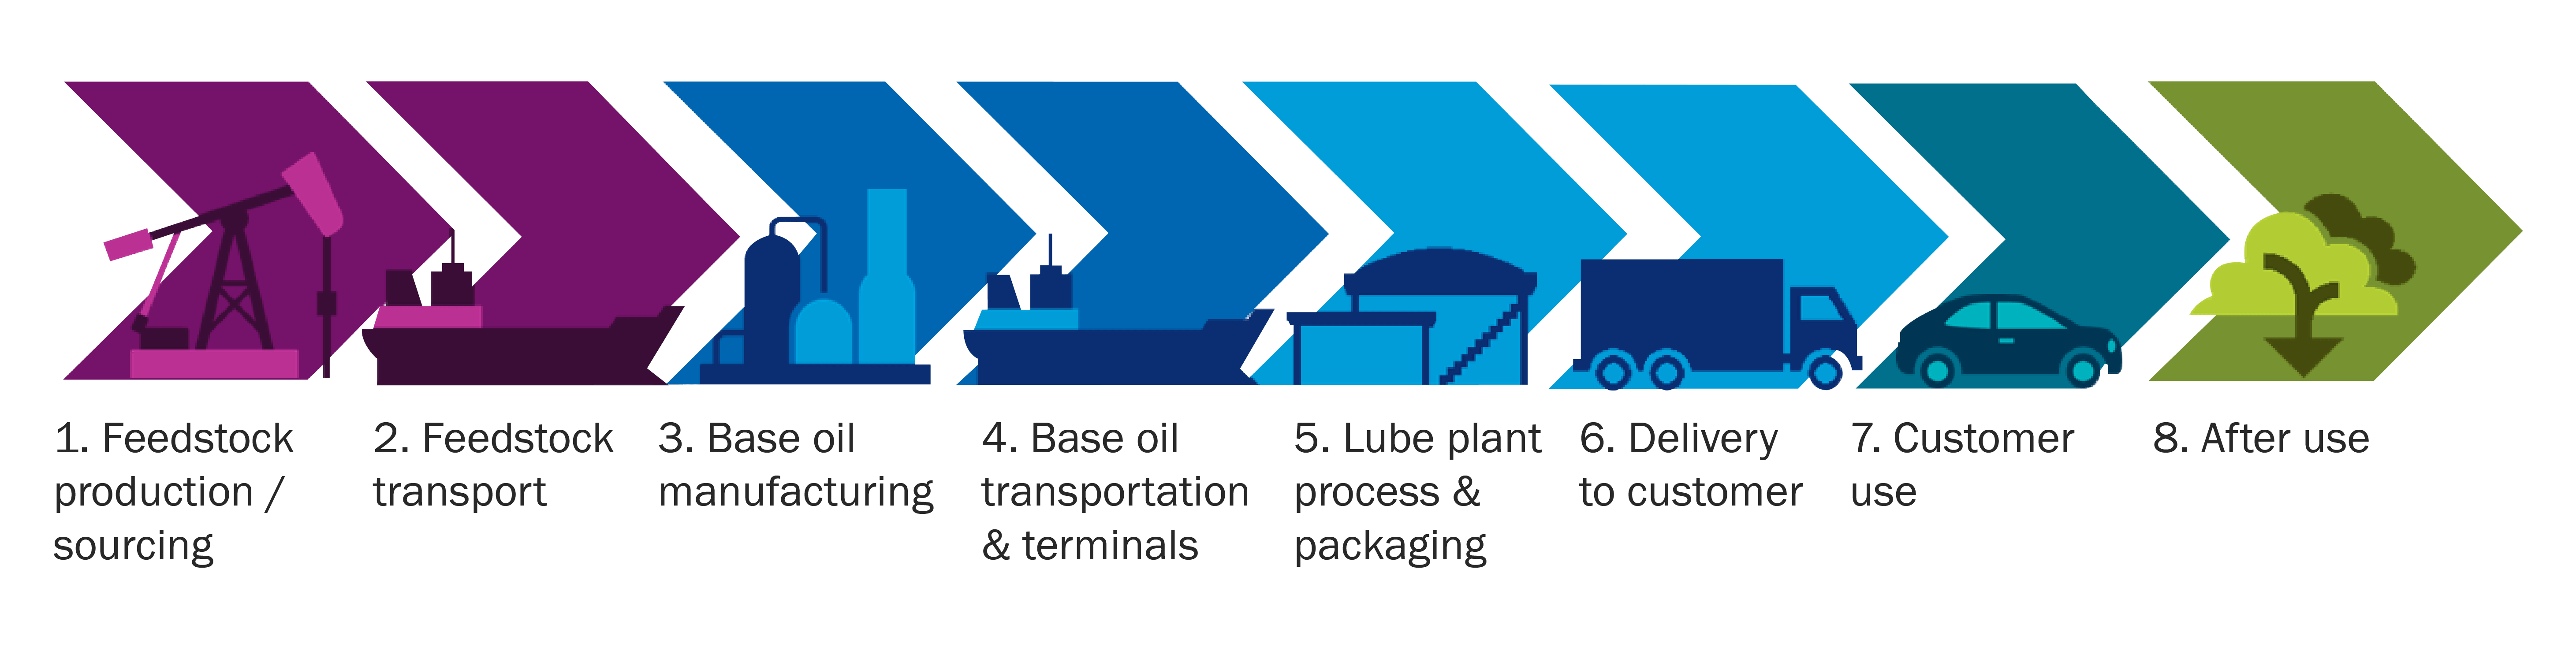 Sustainability across our Lubricants value chain